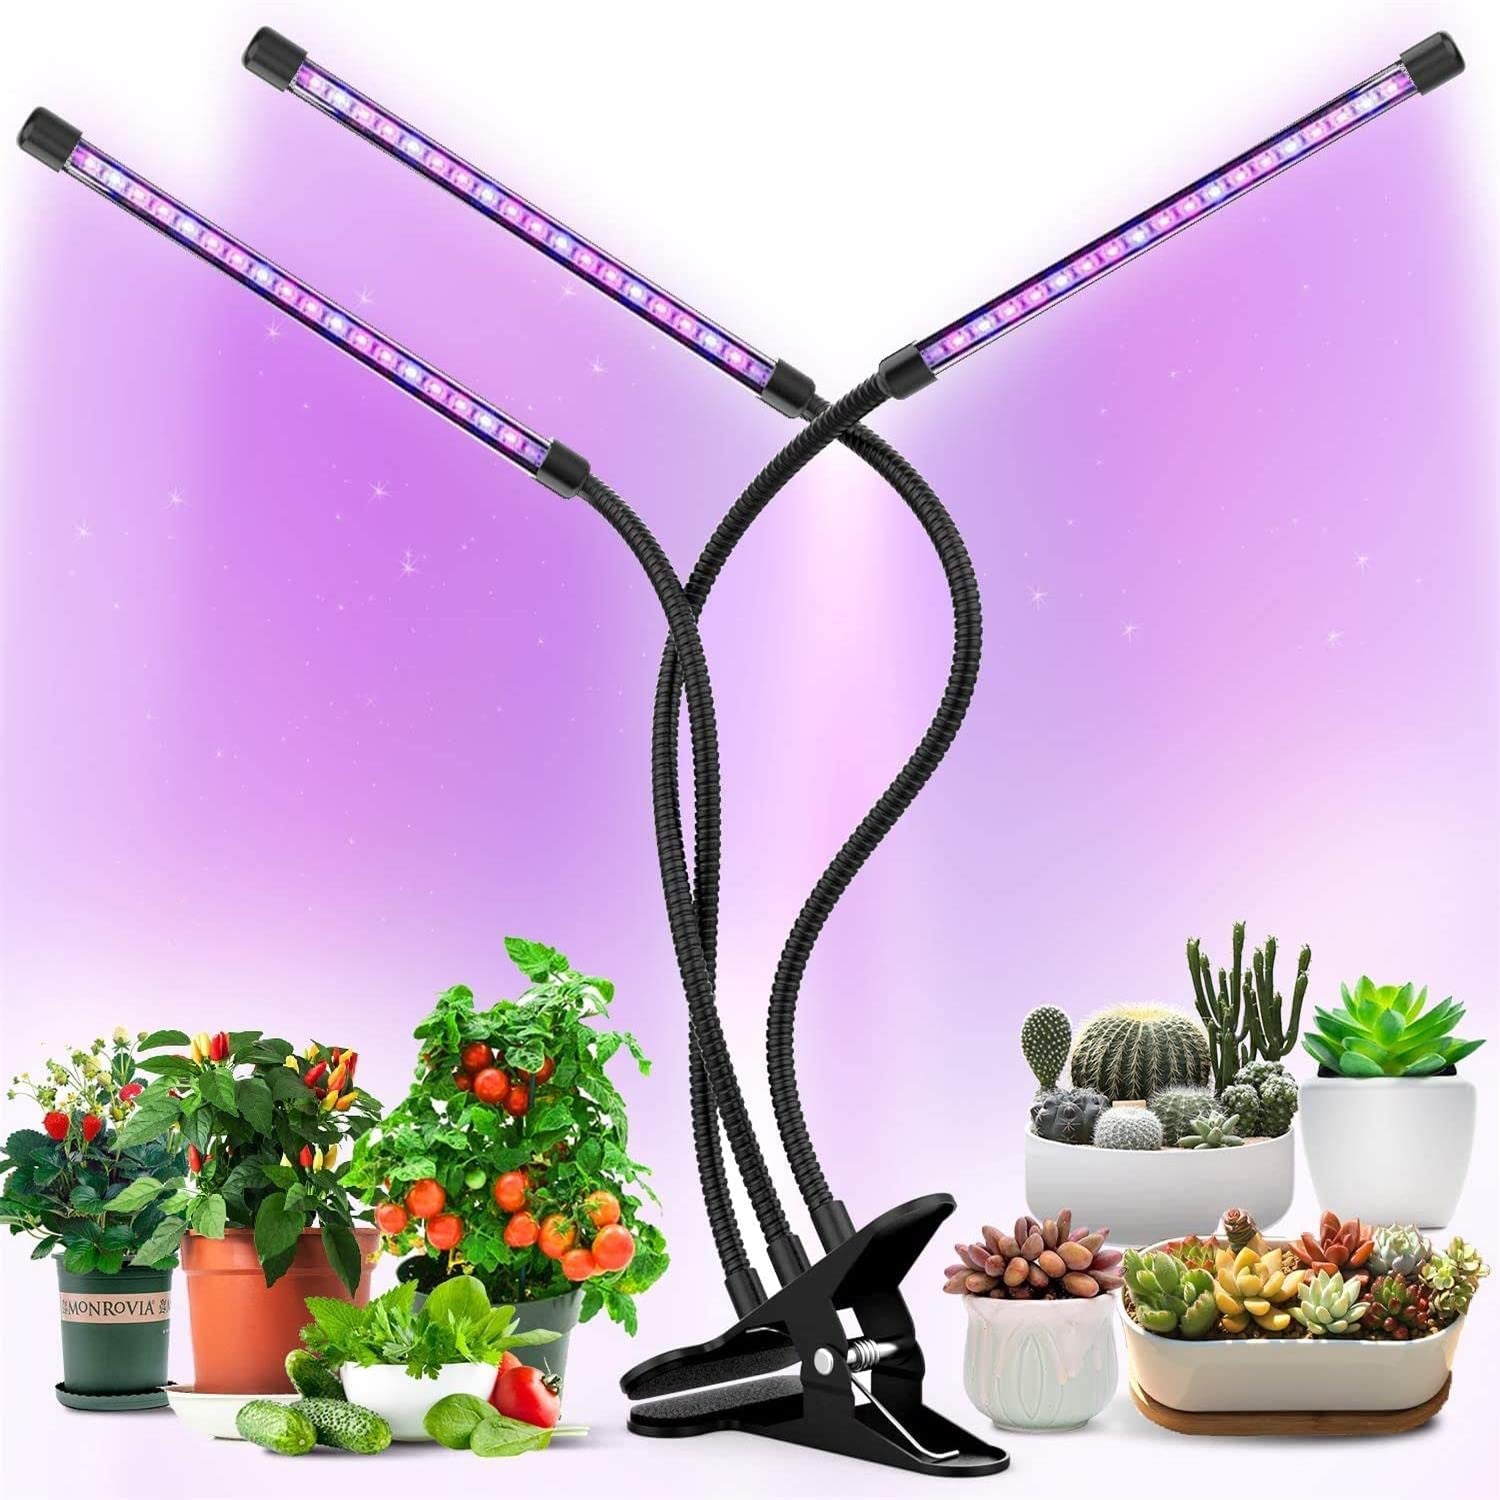 VNPONV, LED Grow Light for Indoor Plant, Timing, 3 Heads&13 Dimmable Levels, Plant Grow Light for Indoor Plant with Full Spectrum & Red Blue Spectrum, Adjustable Gooseneck, Auto On/Off Timing 3 9 12H, 3 Switch Modes